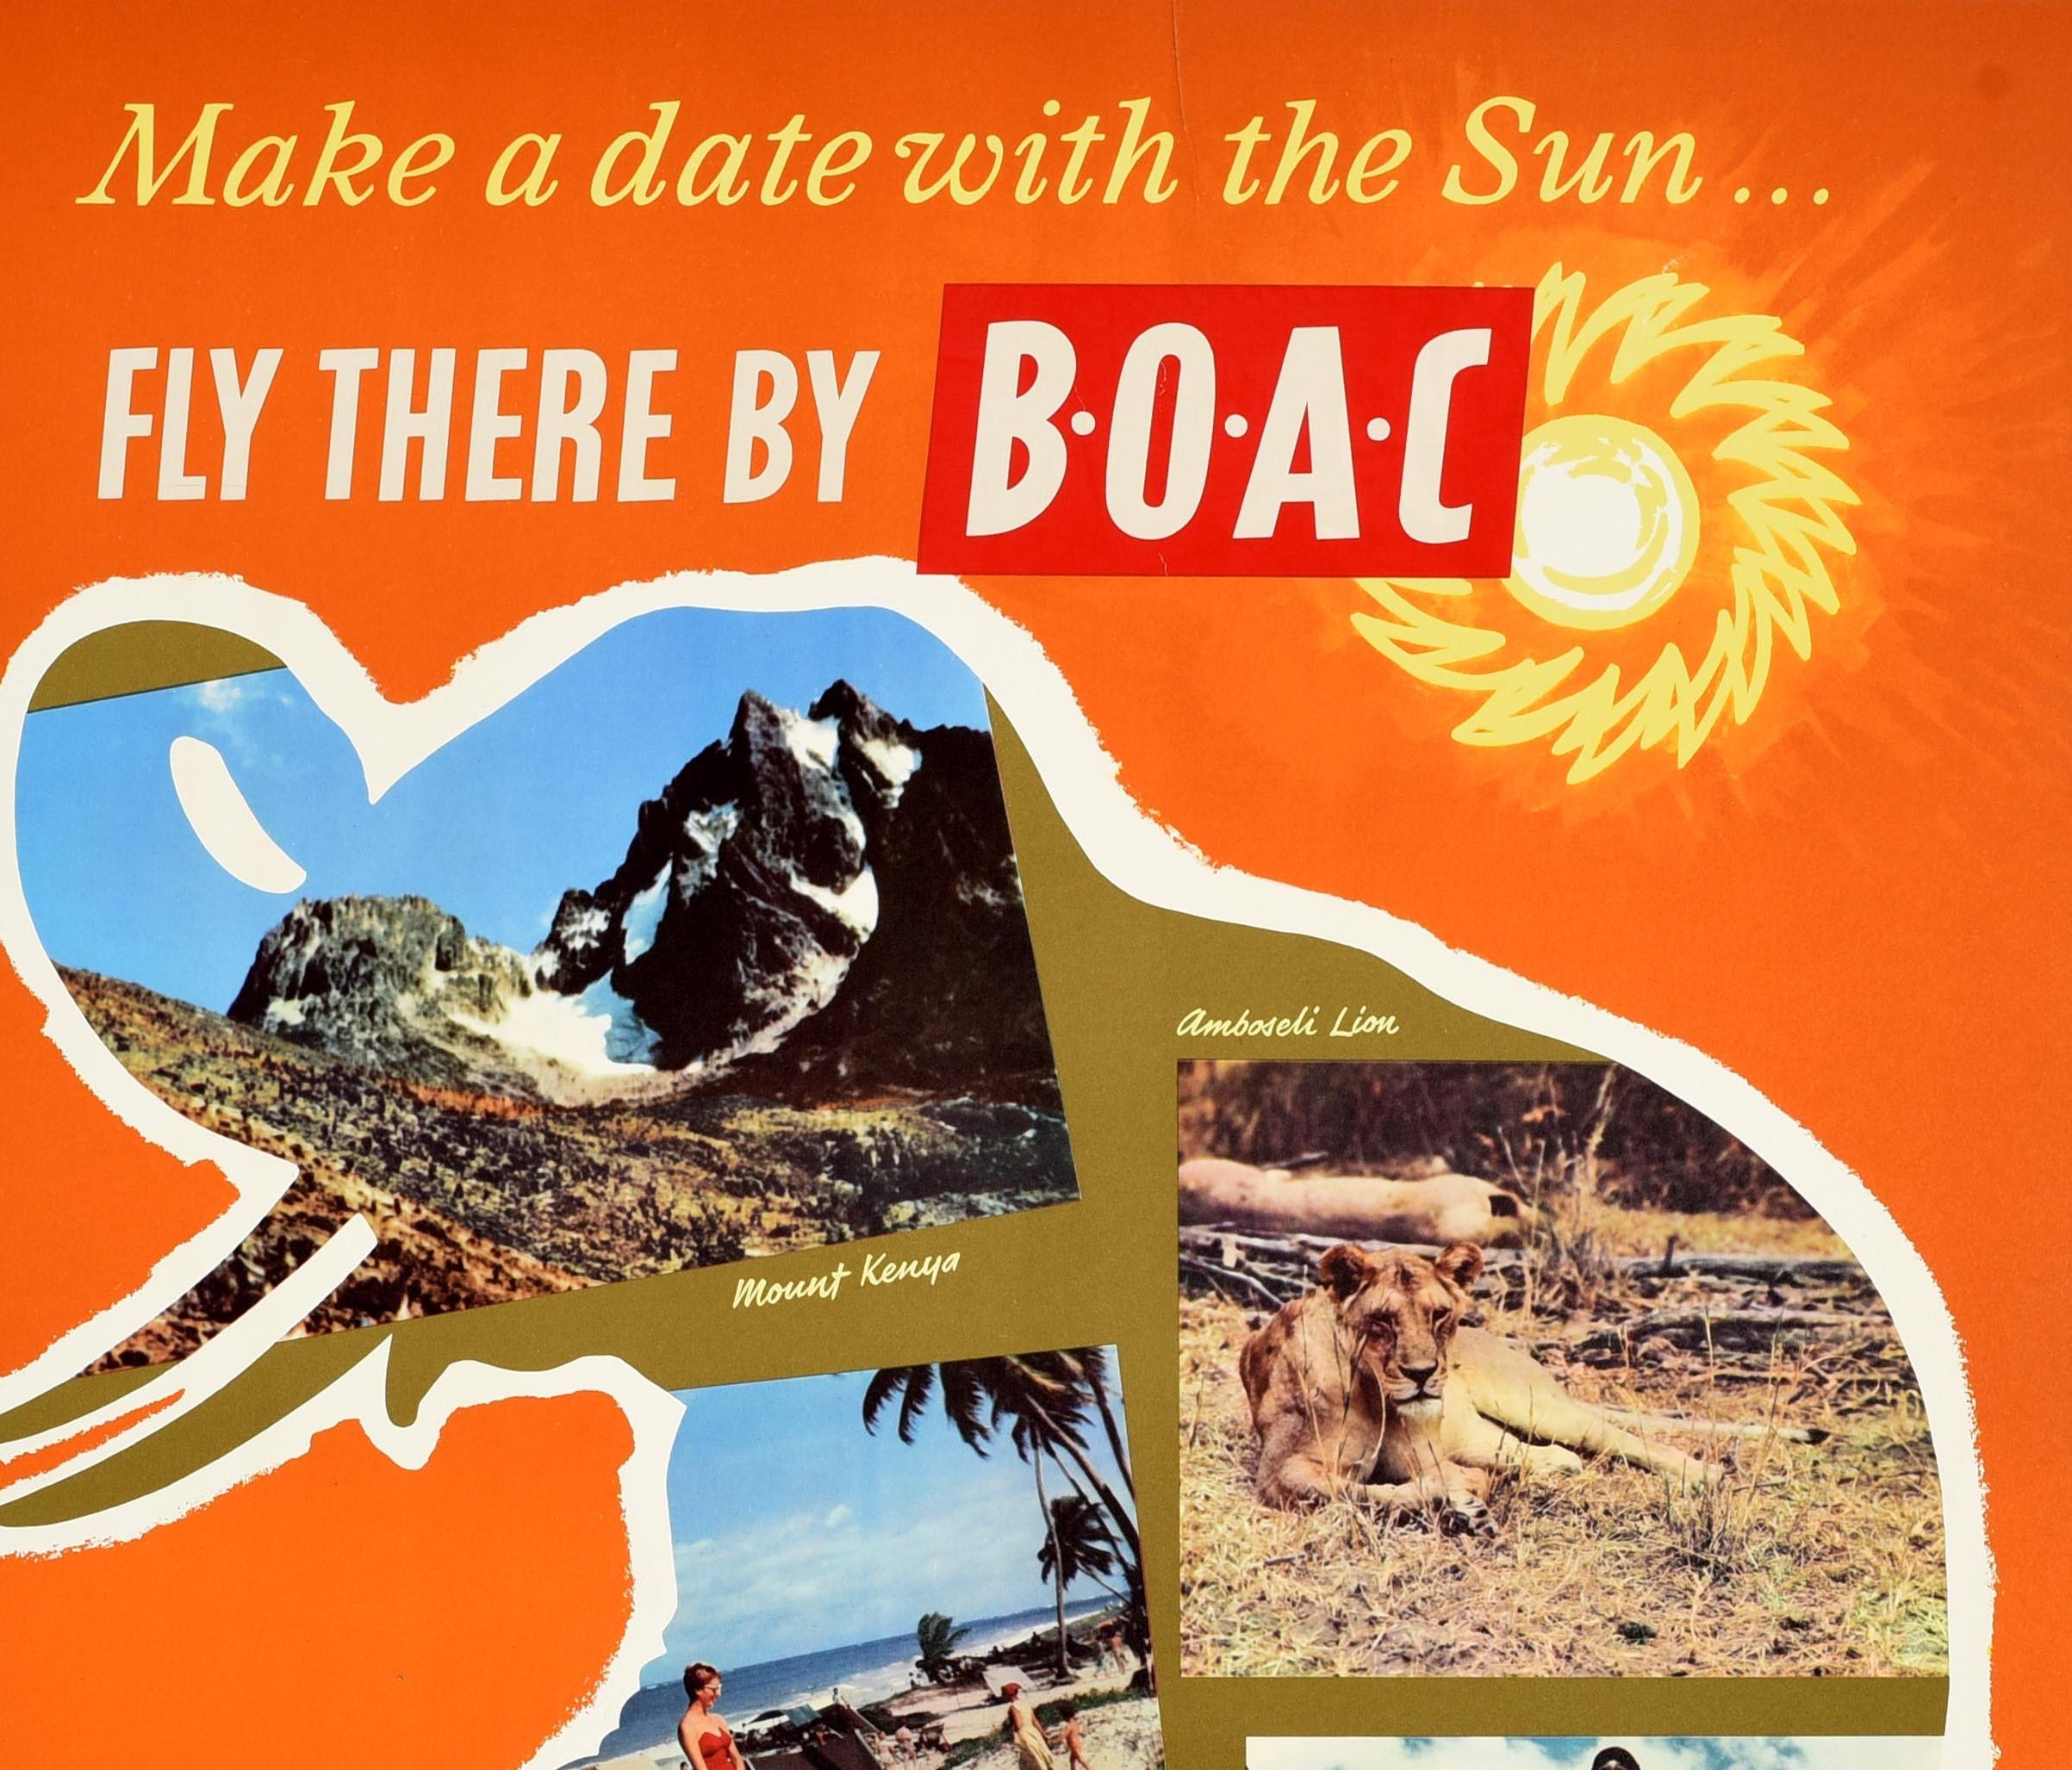 Original vintage travel poster advertising Kenya in East Africa - Make a date with the sun ... in wonderful Kenya Fly there by BOAC - featuring a colourful design with photos and captions of Mount Kenya showing the rocky mountain peaks below a blue